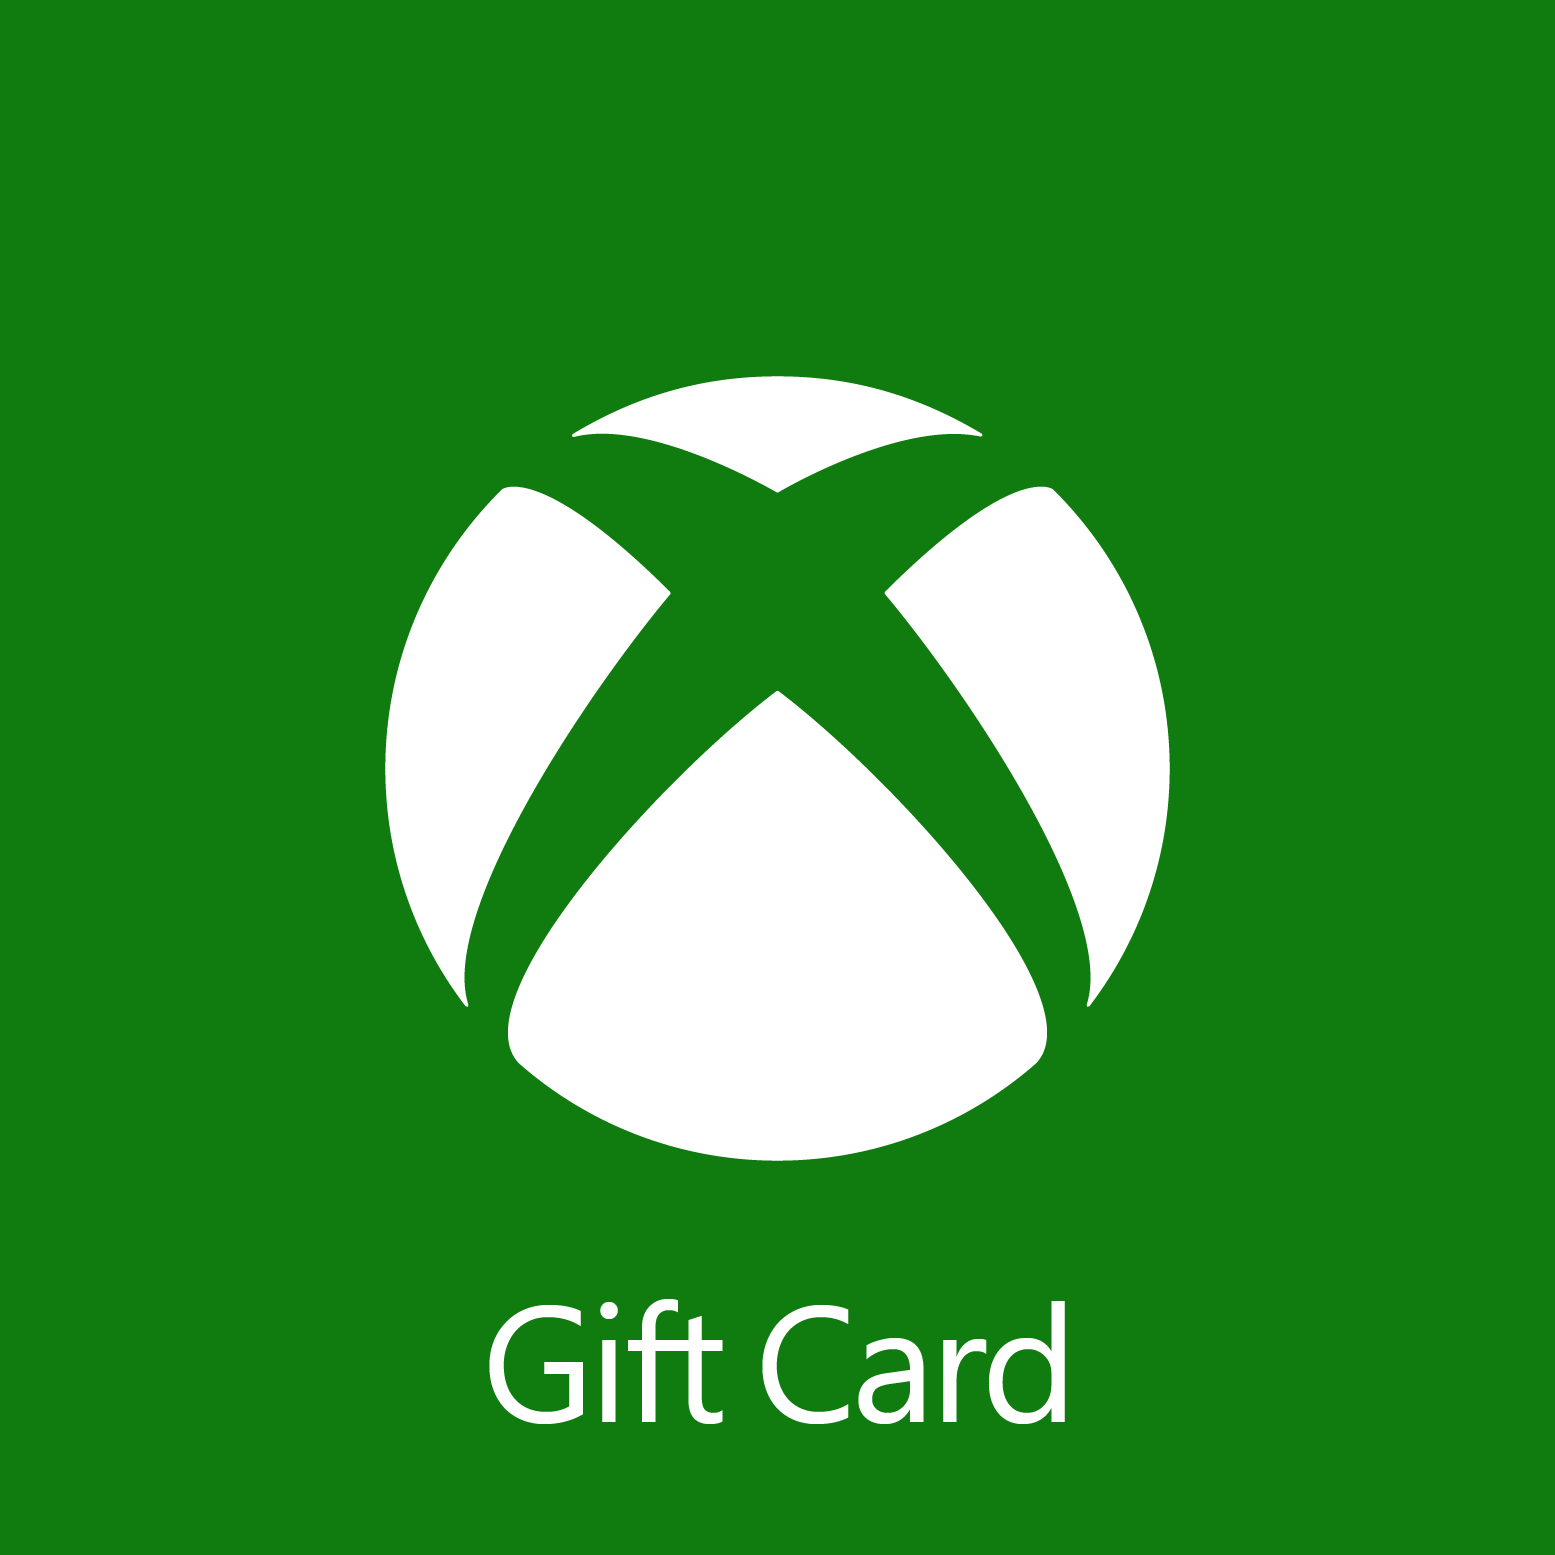 Xbox Live 45 EURO Gift Card (Microsoft Gift Card) Key Instant Email